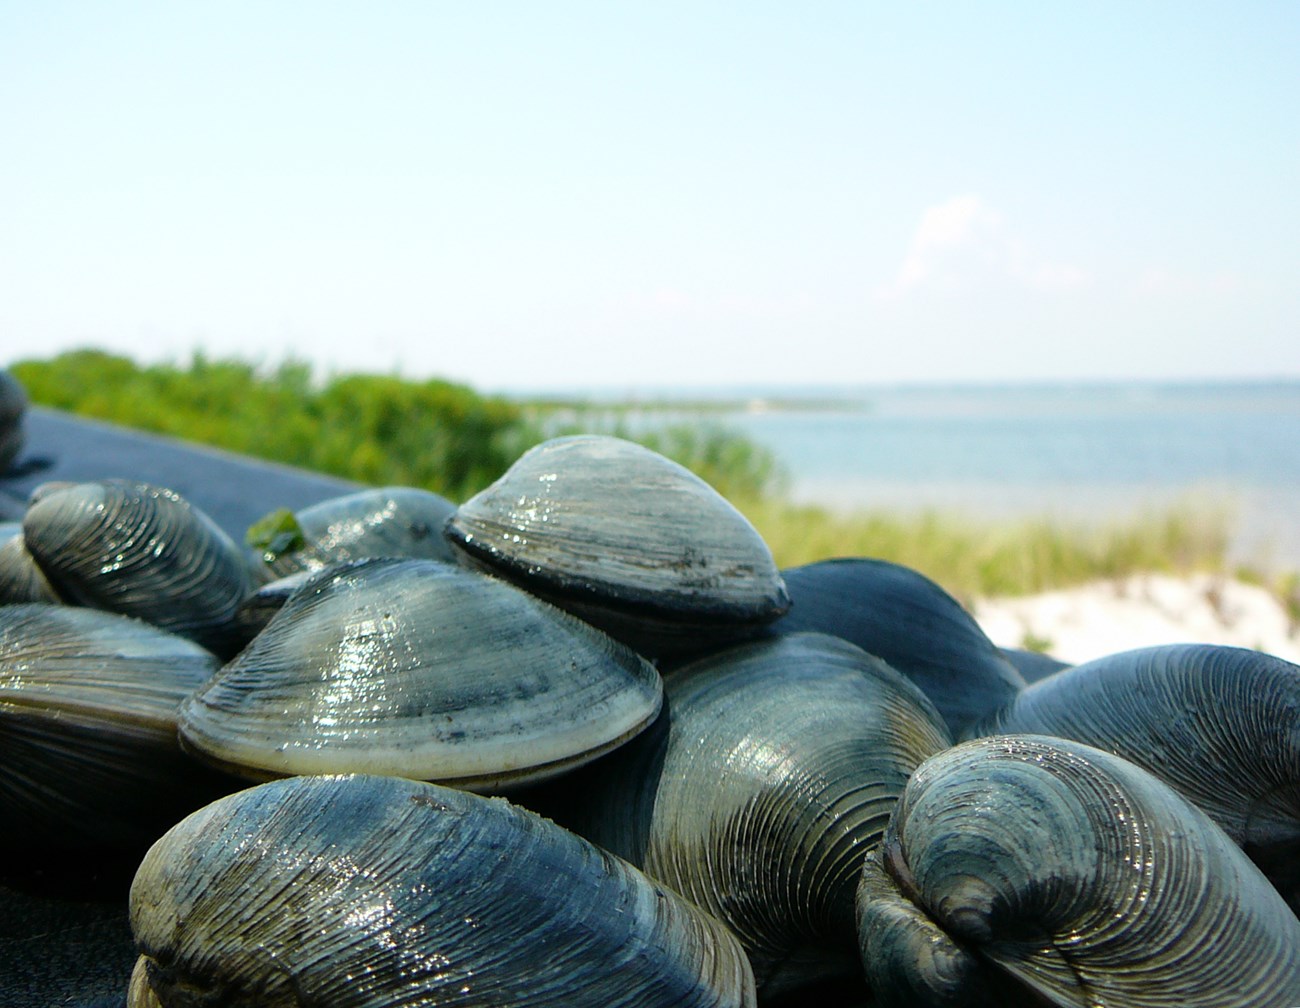 A pile of harvested hard shell clams sit near the water's edge.